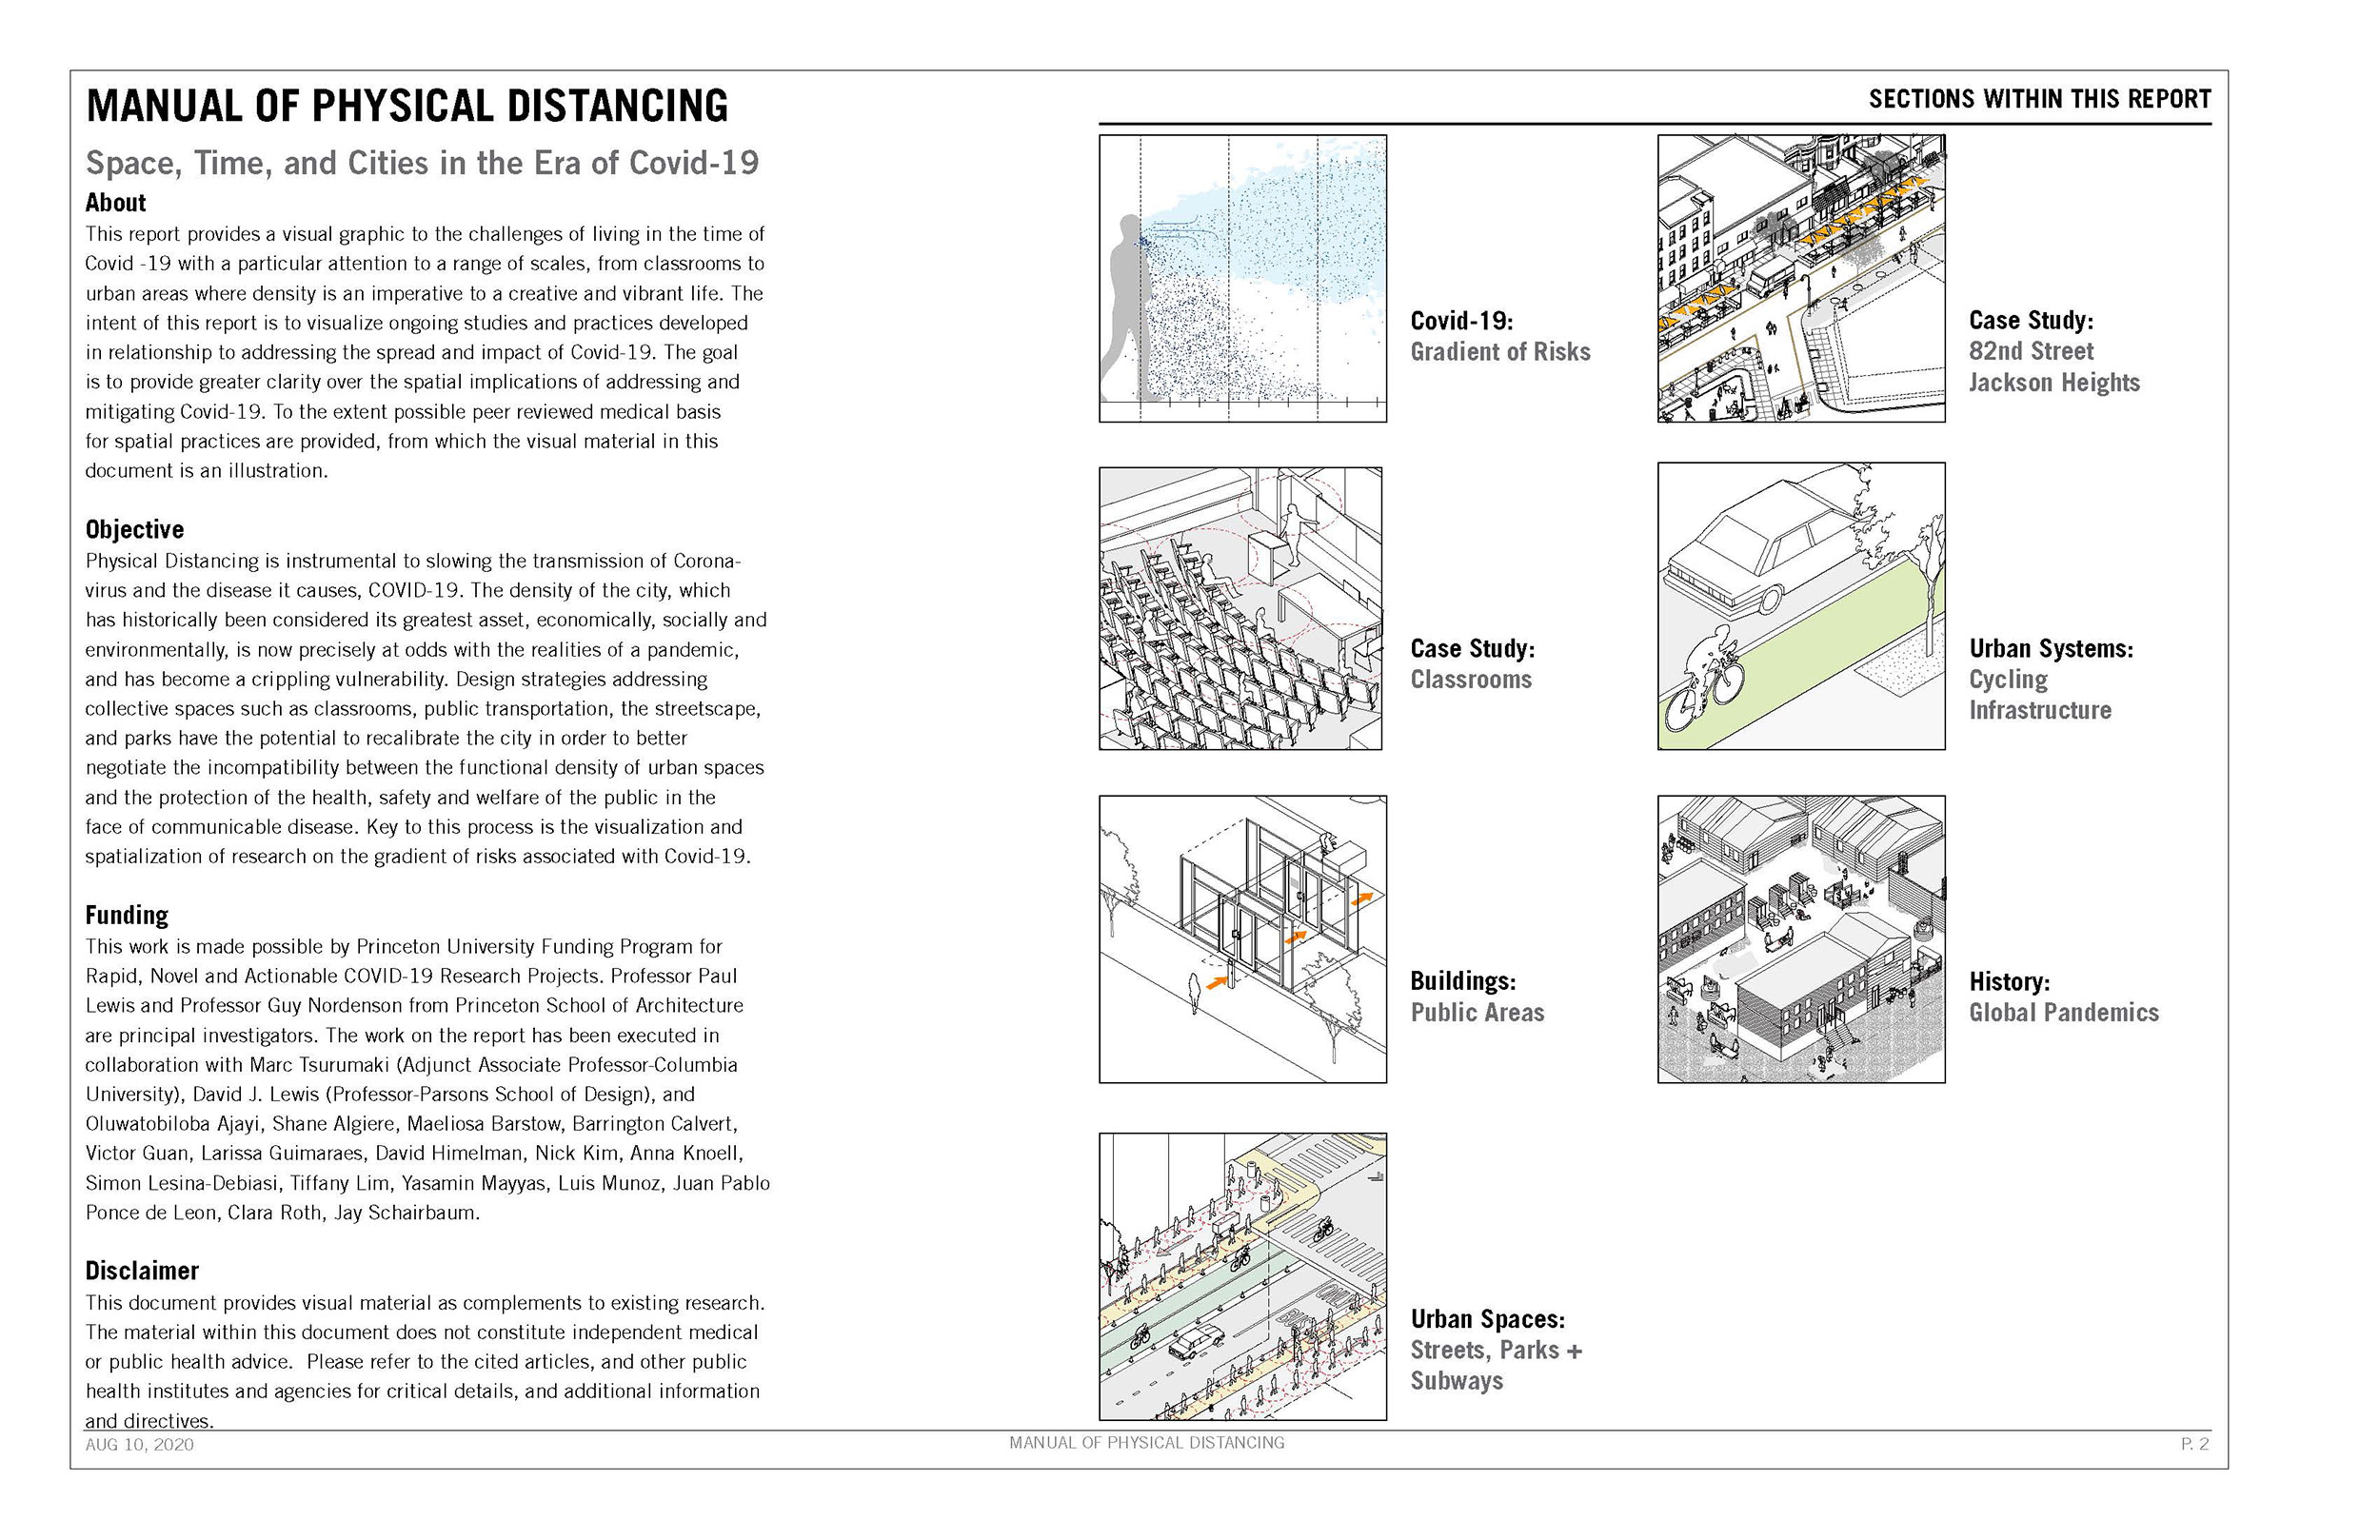 Manual of Physical Distancing. Authors: LTL Architects and Guy Nordenson & Associates.